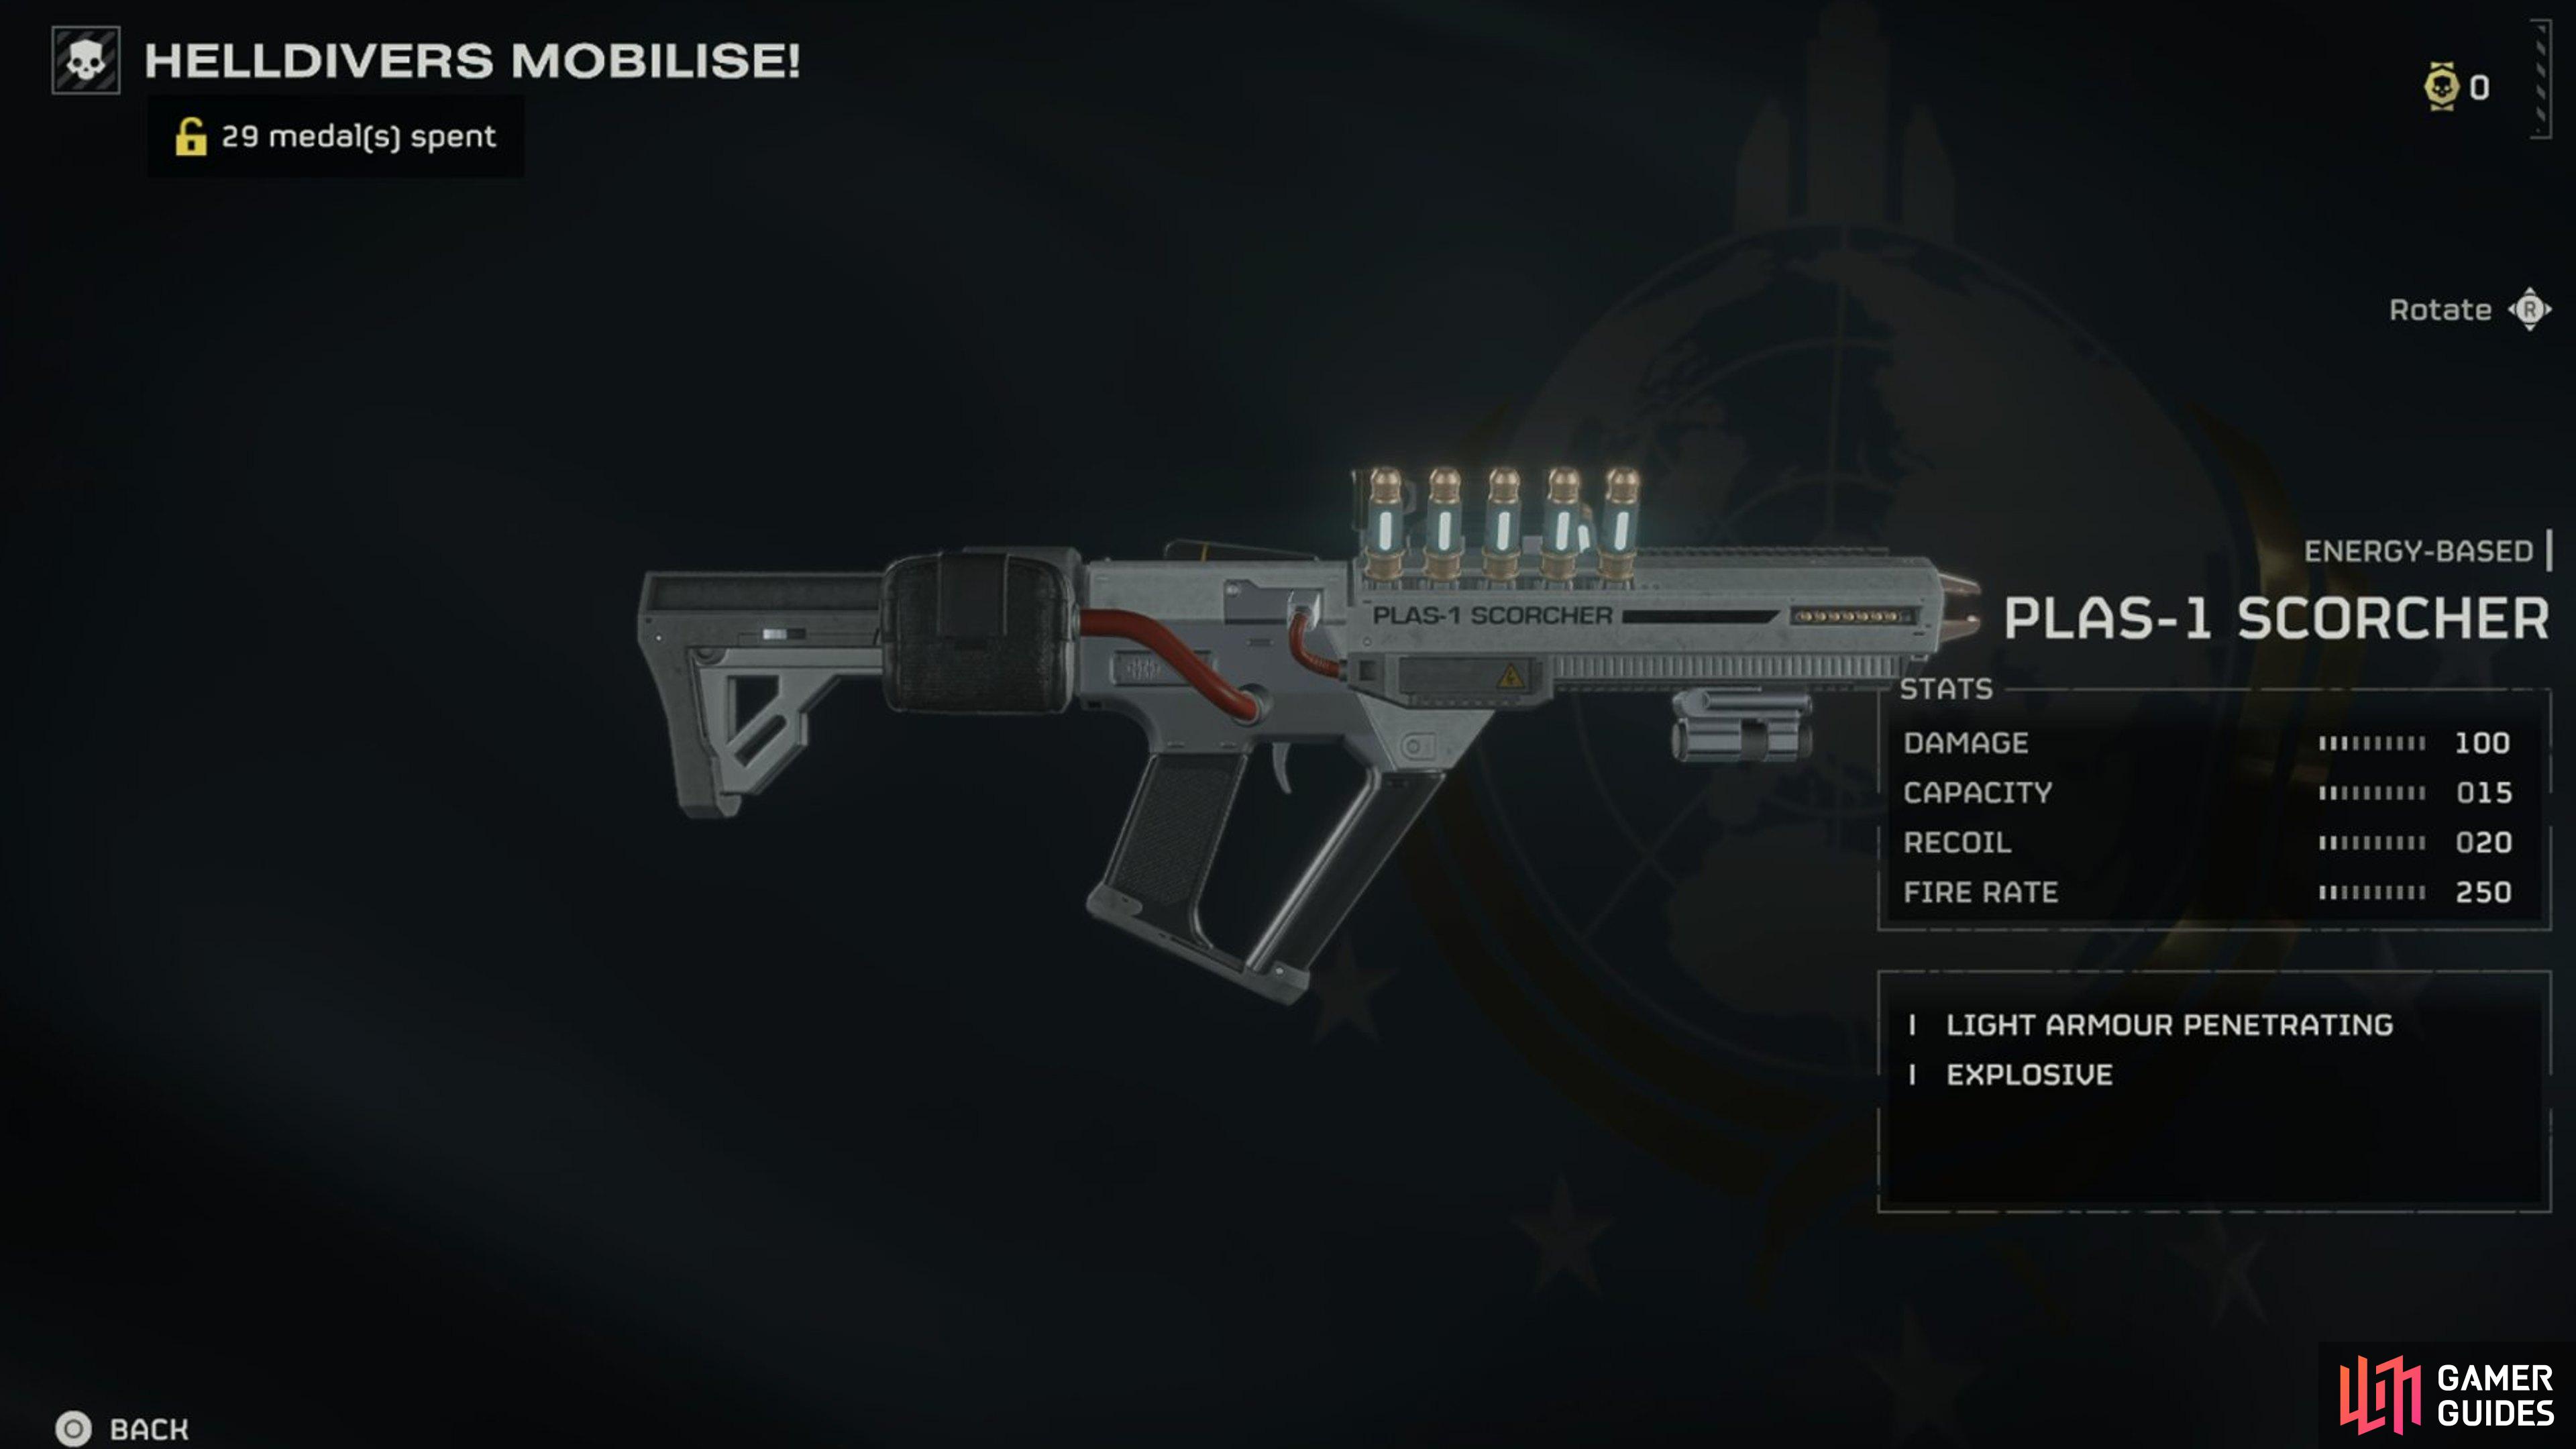 This energy-based weapon is a blend of a shotgun and SMG.